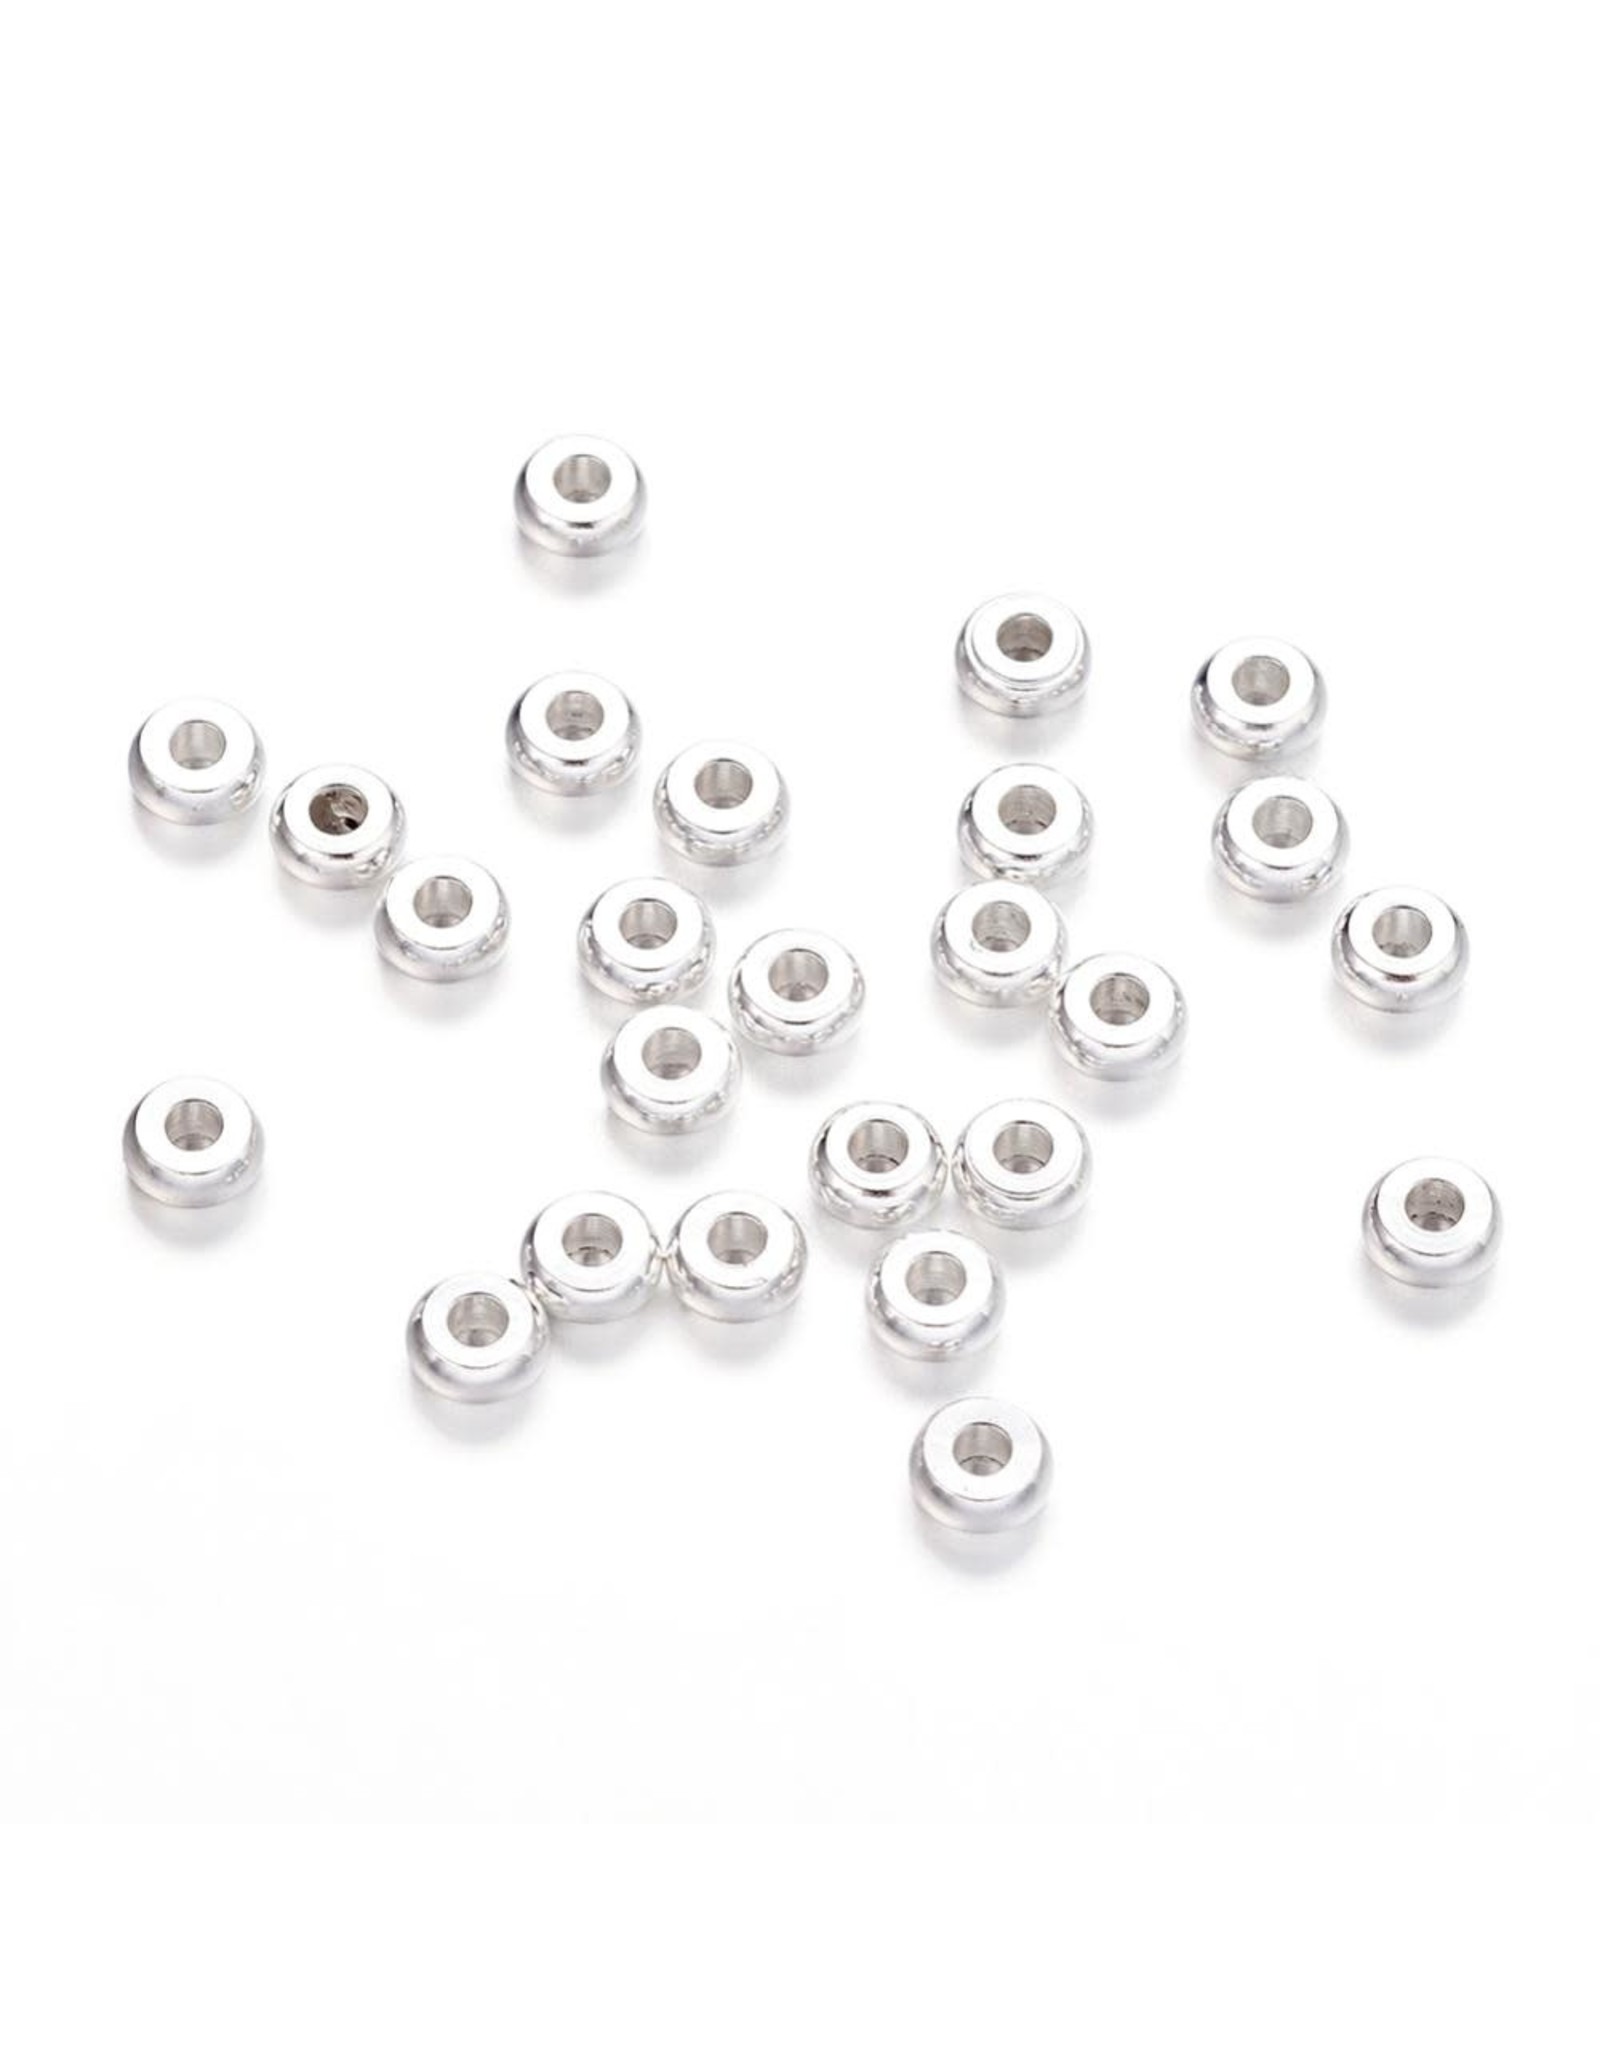 Spacer Bead 4x1.5mm Silver x100